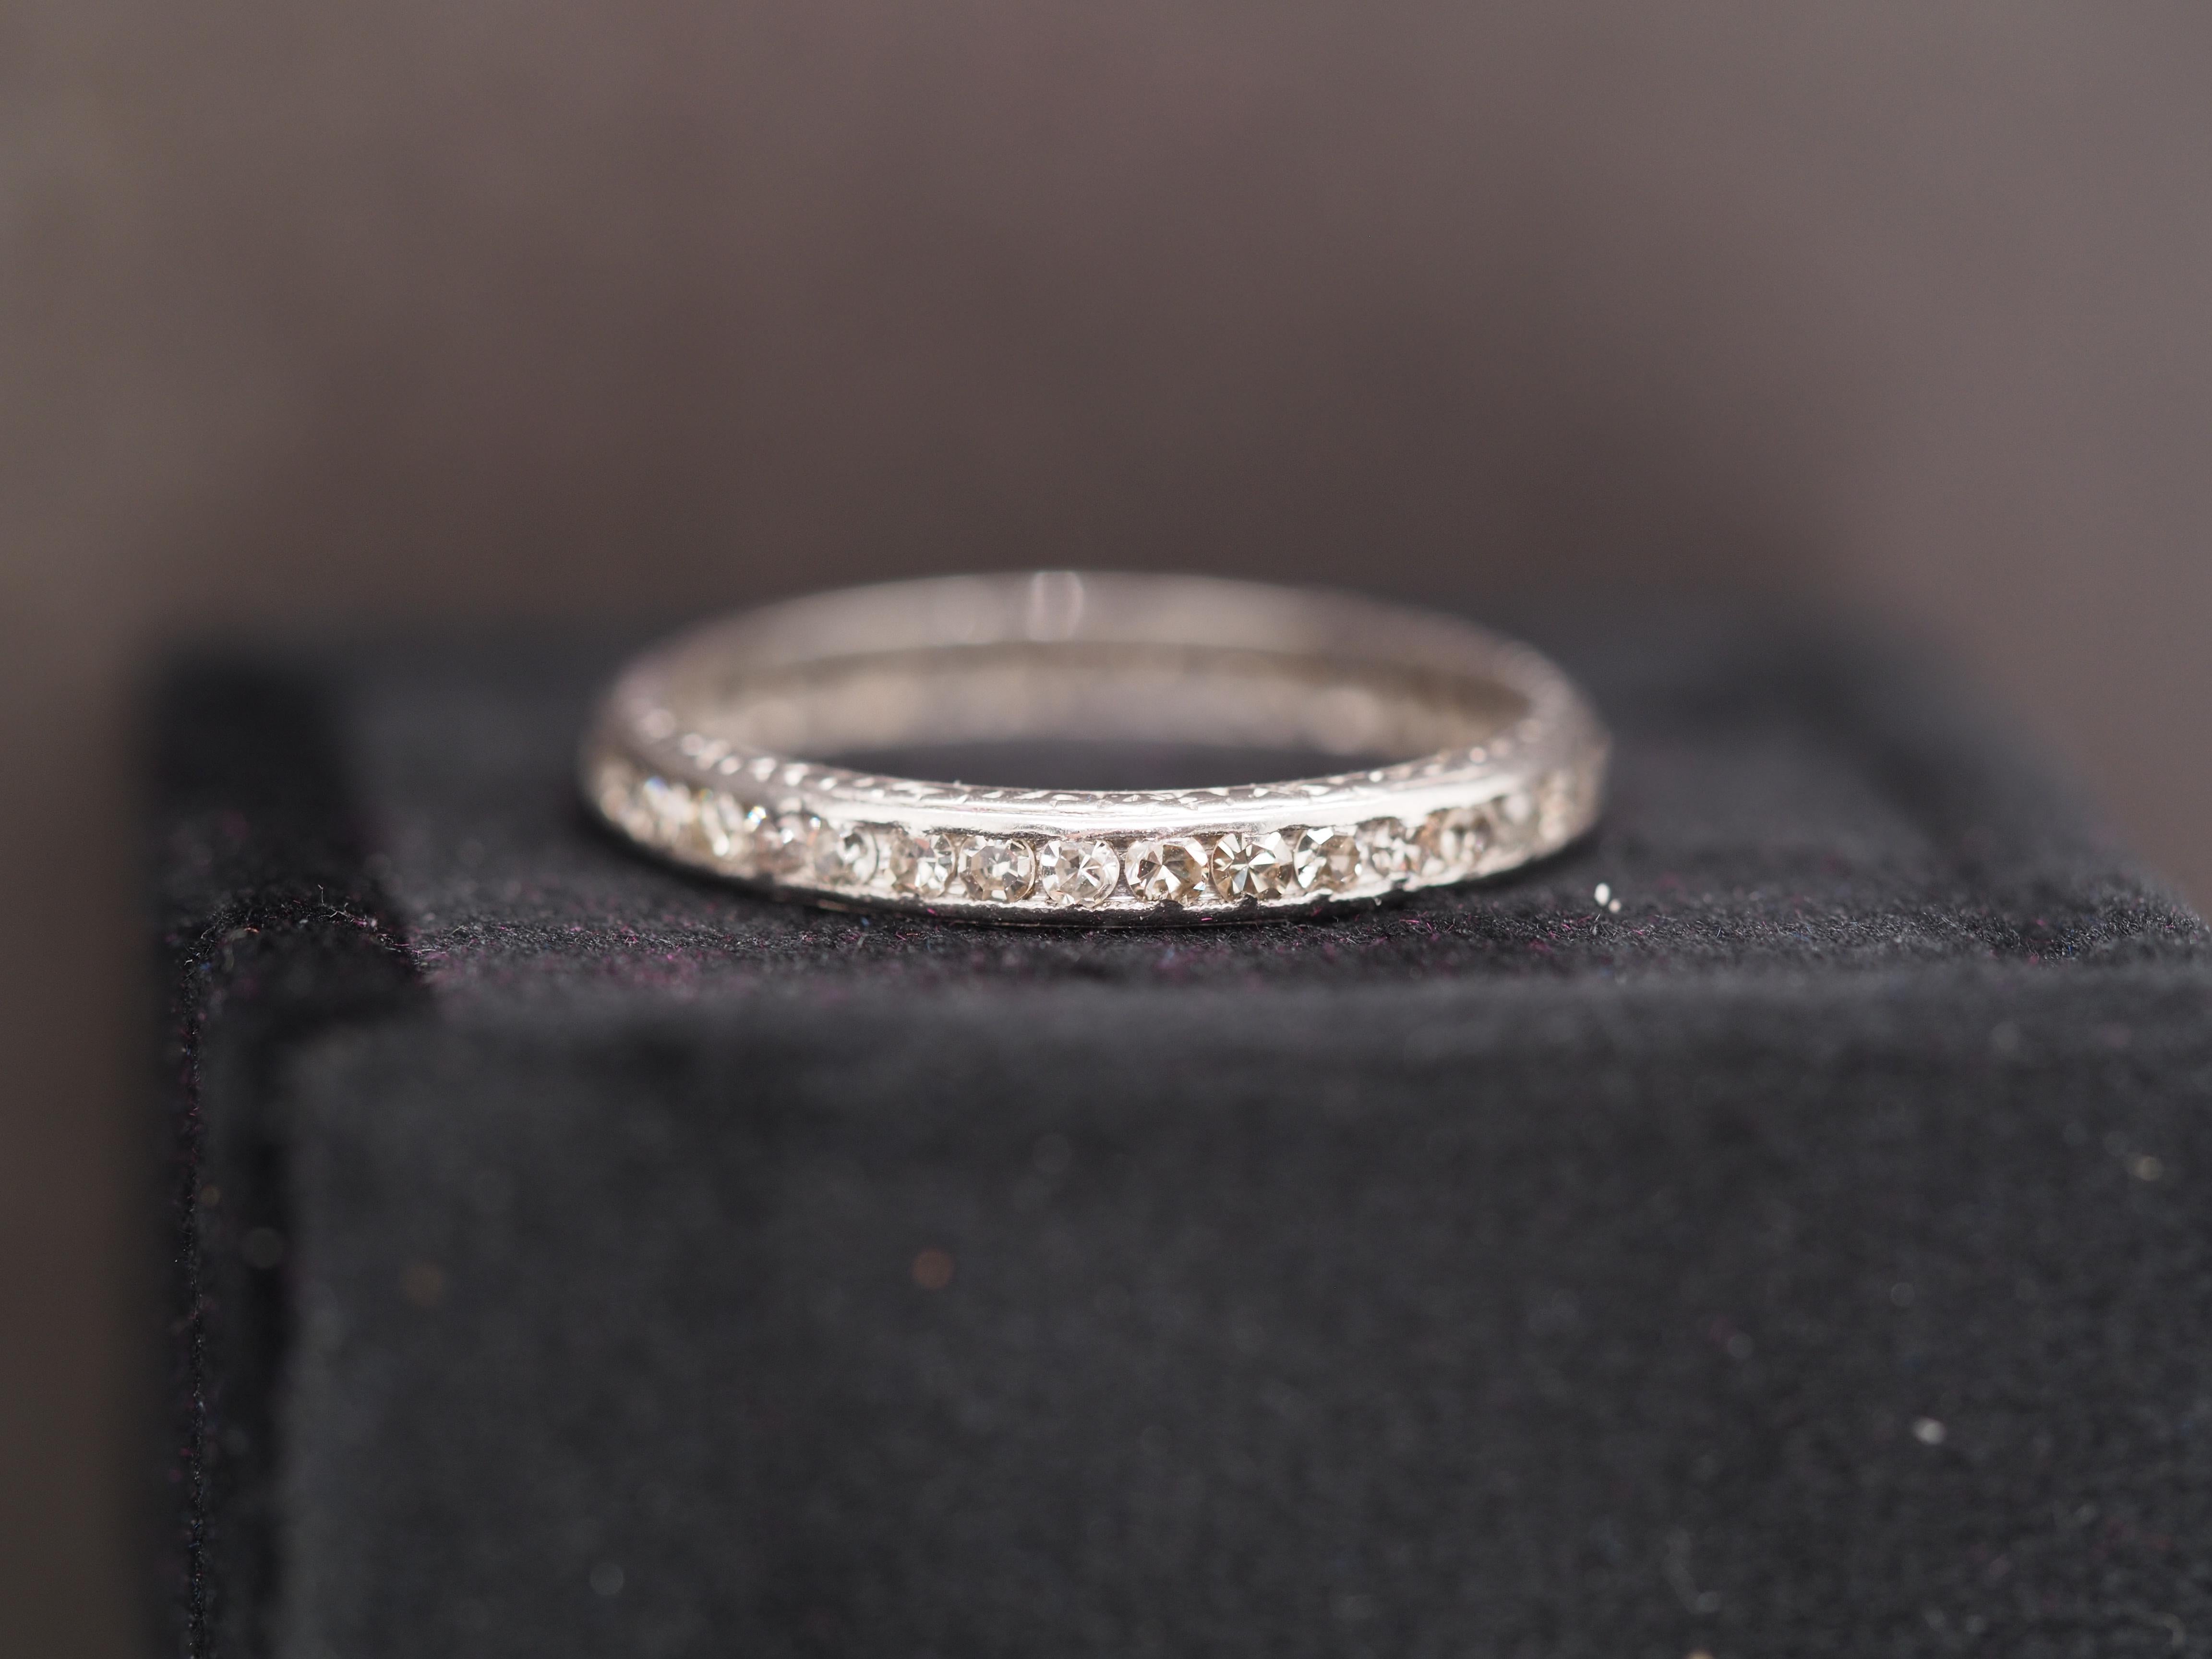 Year: 1950
Item Details:
Ring Size: 6.5
Metal Type: Platinum [Hallmarked, and Tested]
Weight: 2.7 grams
Diamond Details:
Antique Single Cut, 1.00ct, G Color, VS/SI Clarity
Band Width: 2.7 mm
Condition: Excellent
Price: $1600